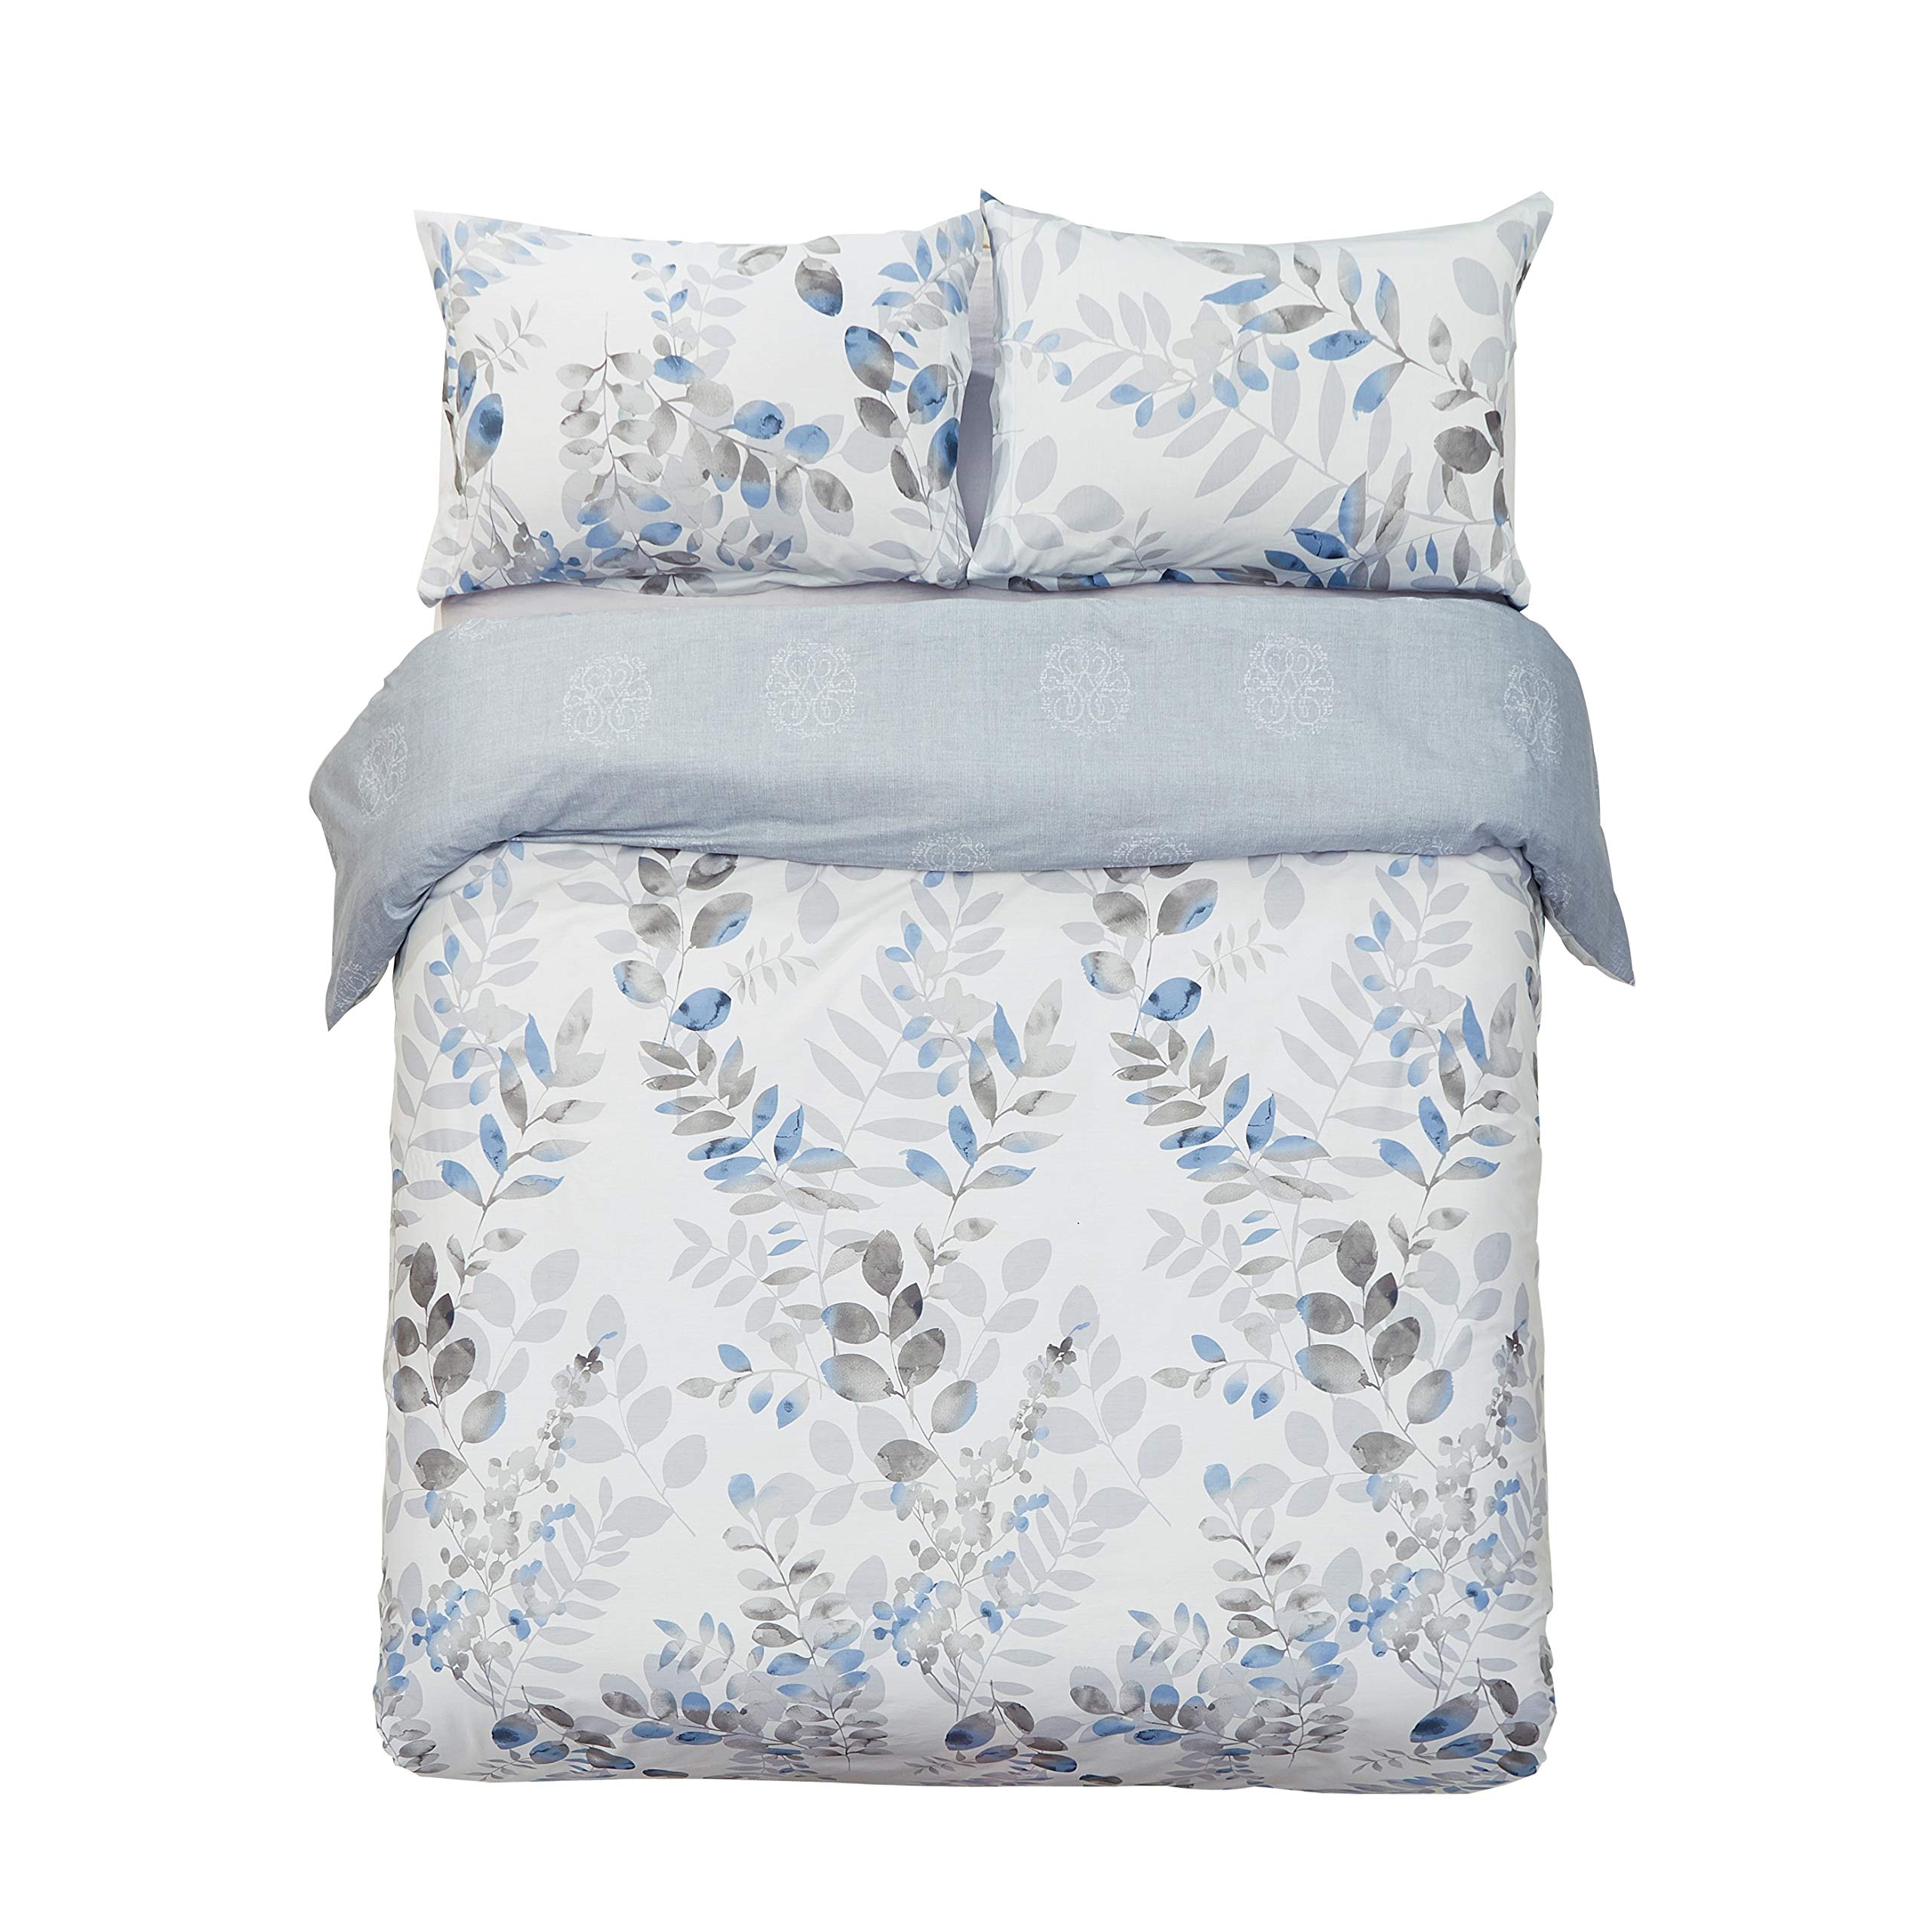 Book Cover Word of Dream Cotton Duvet Cover Sets Twin Size, Blue Grey Leaves Pattern Printed Soft Comforter Bedding Duvet Cover with Zipper Closure Corner Ties, 2 Piece (1 Duvet Cover + 1 Pillow Sham)